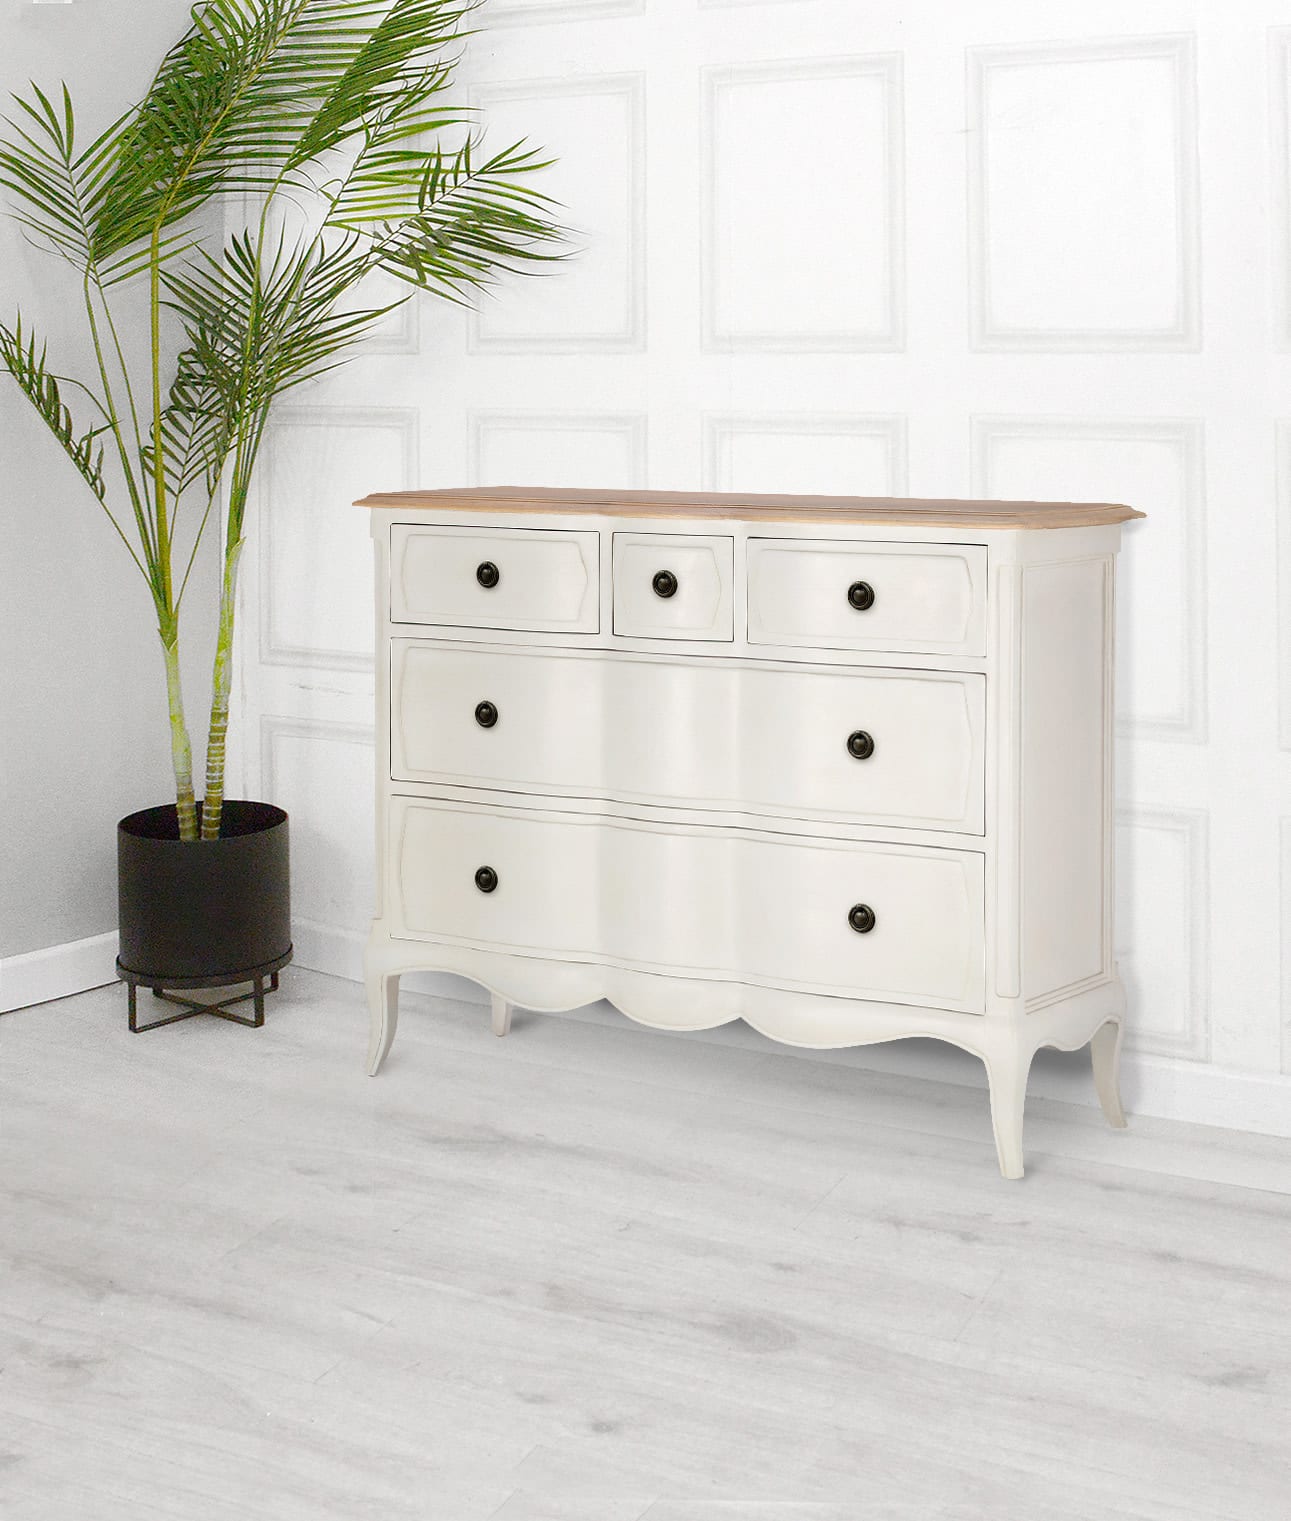 Amelie White 5 Drawer Chest of Drawers by Willis & Gambier